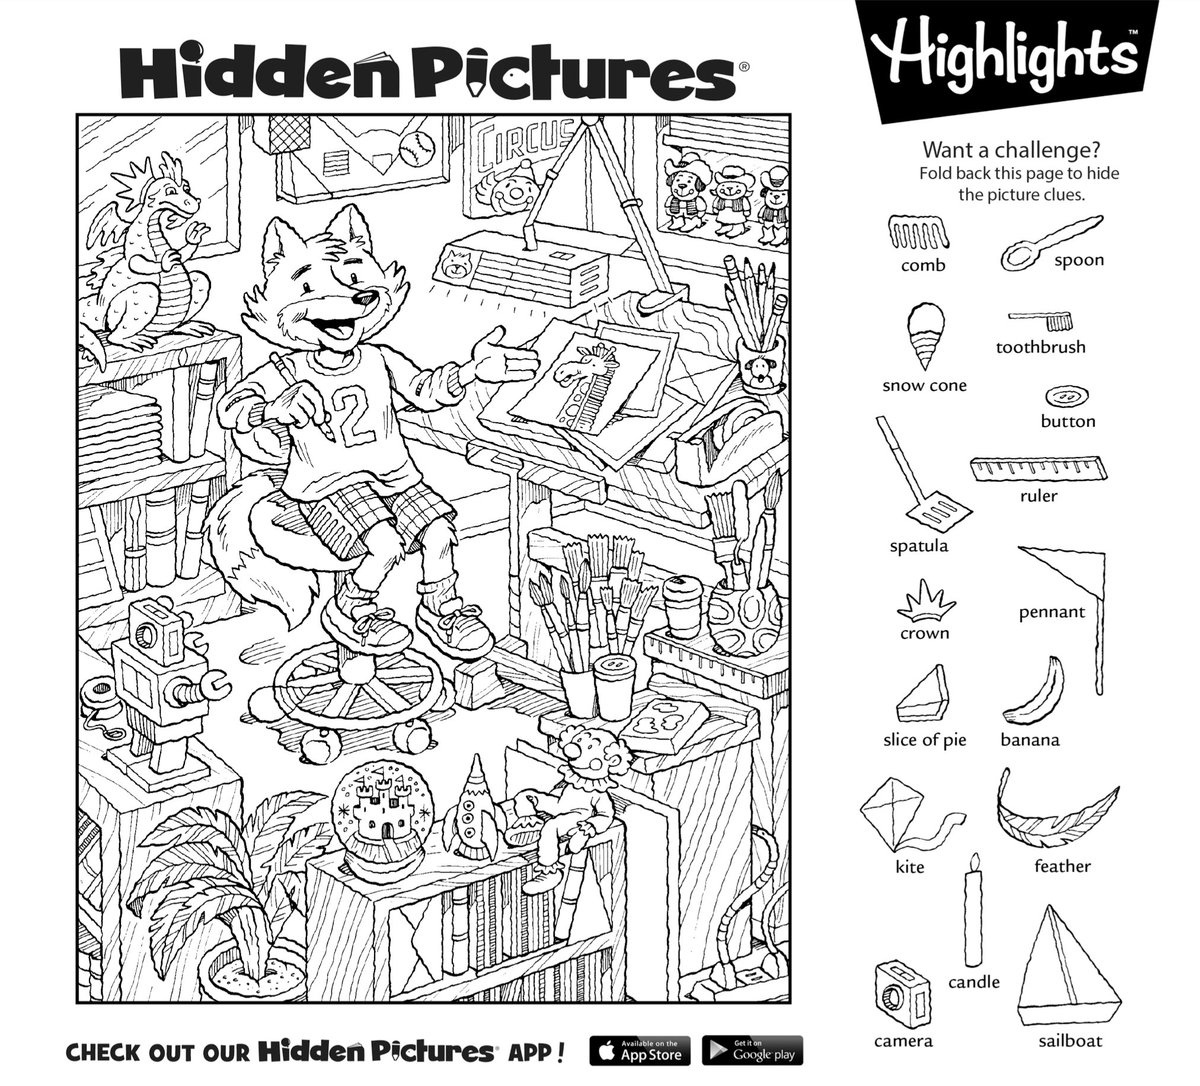 Highlights On Twitter: &amp;quot;enjoy An Afternoon Puzzle Break, Then - Free Printable Highlights Hidden Pictures